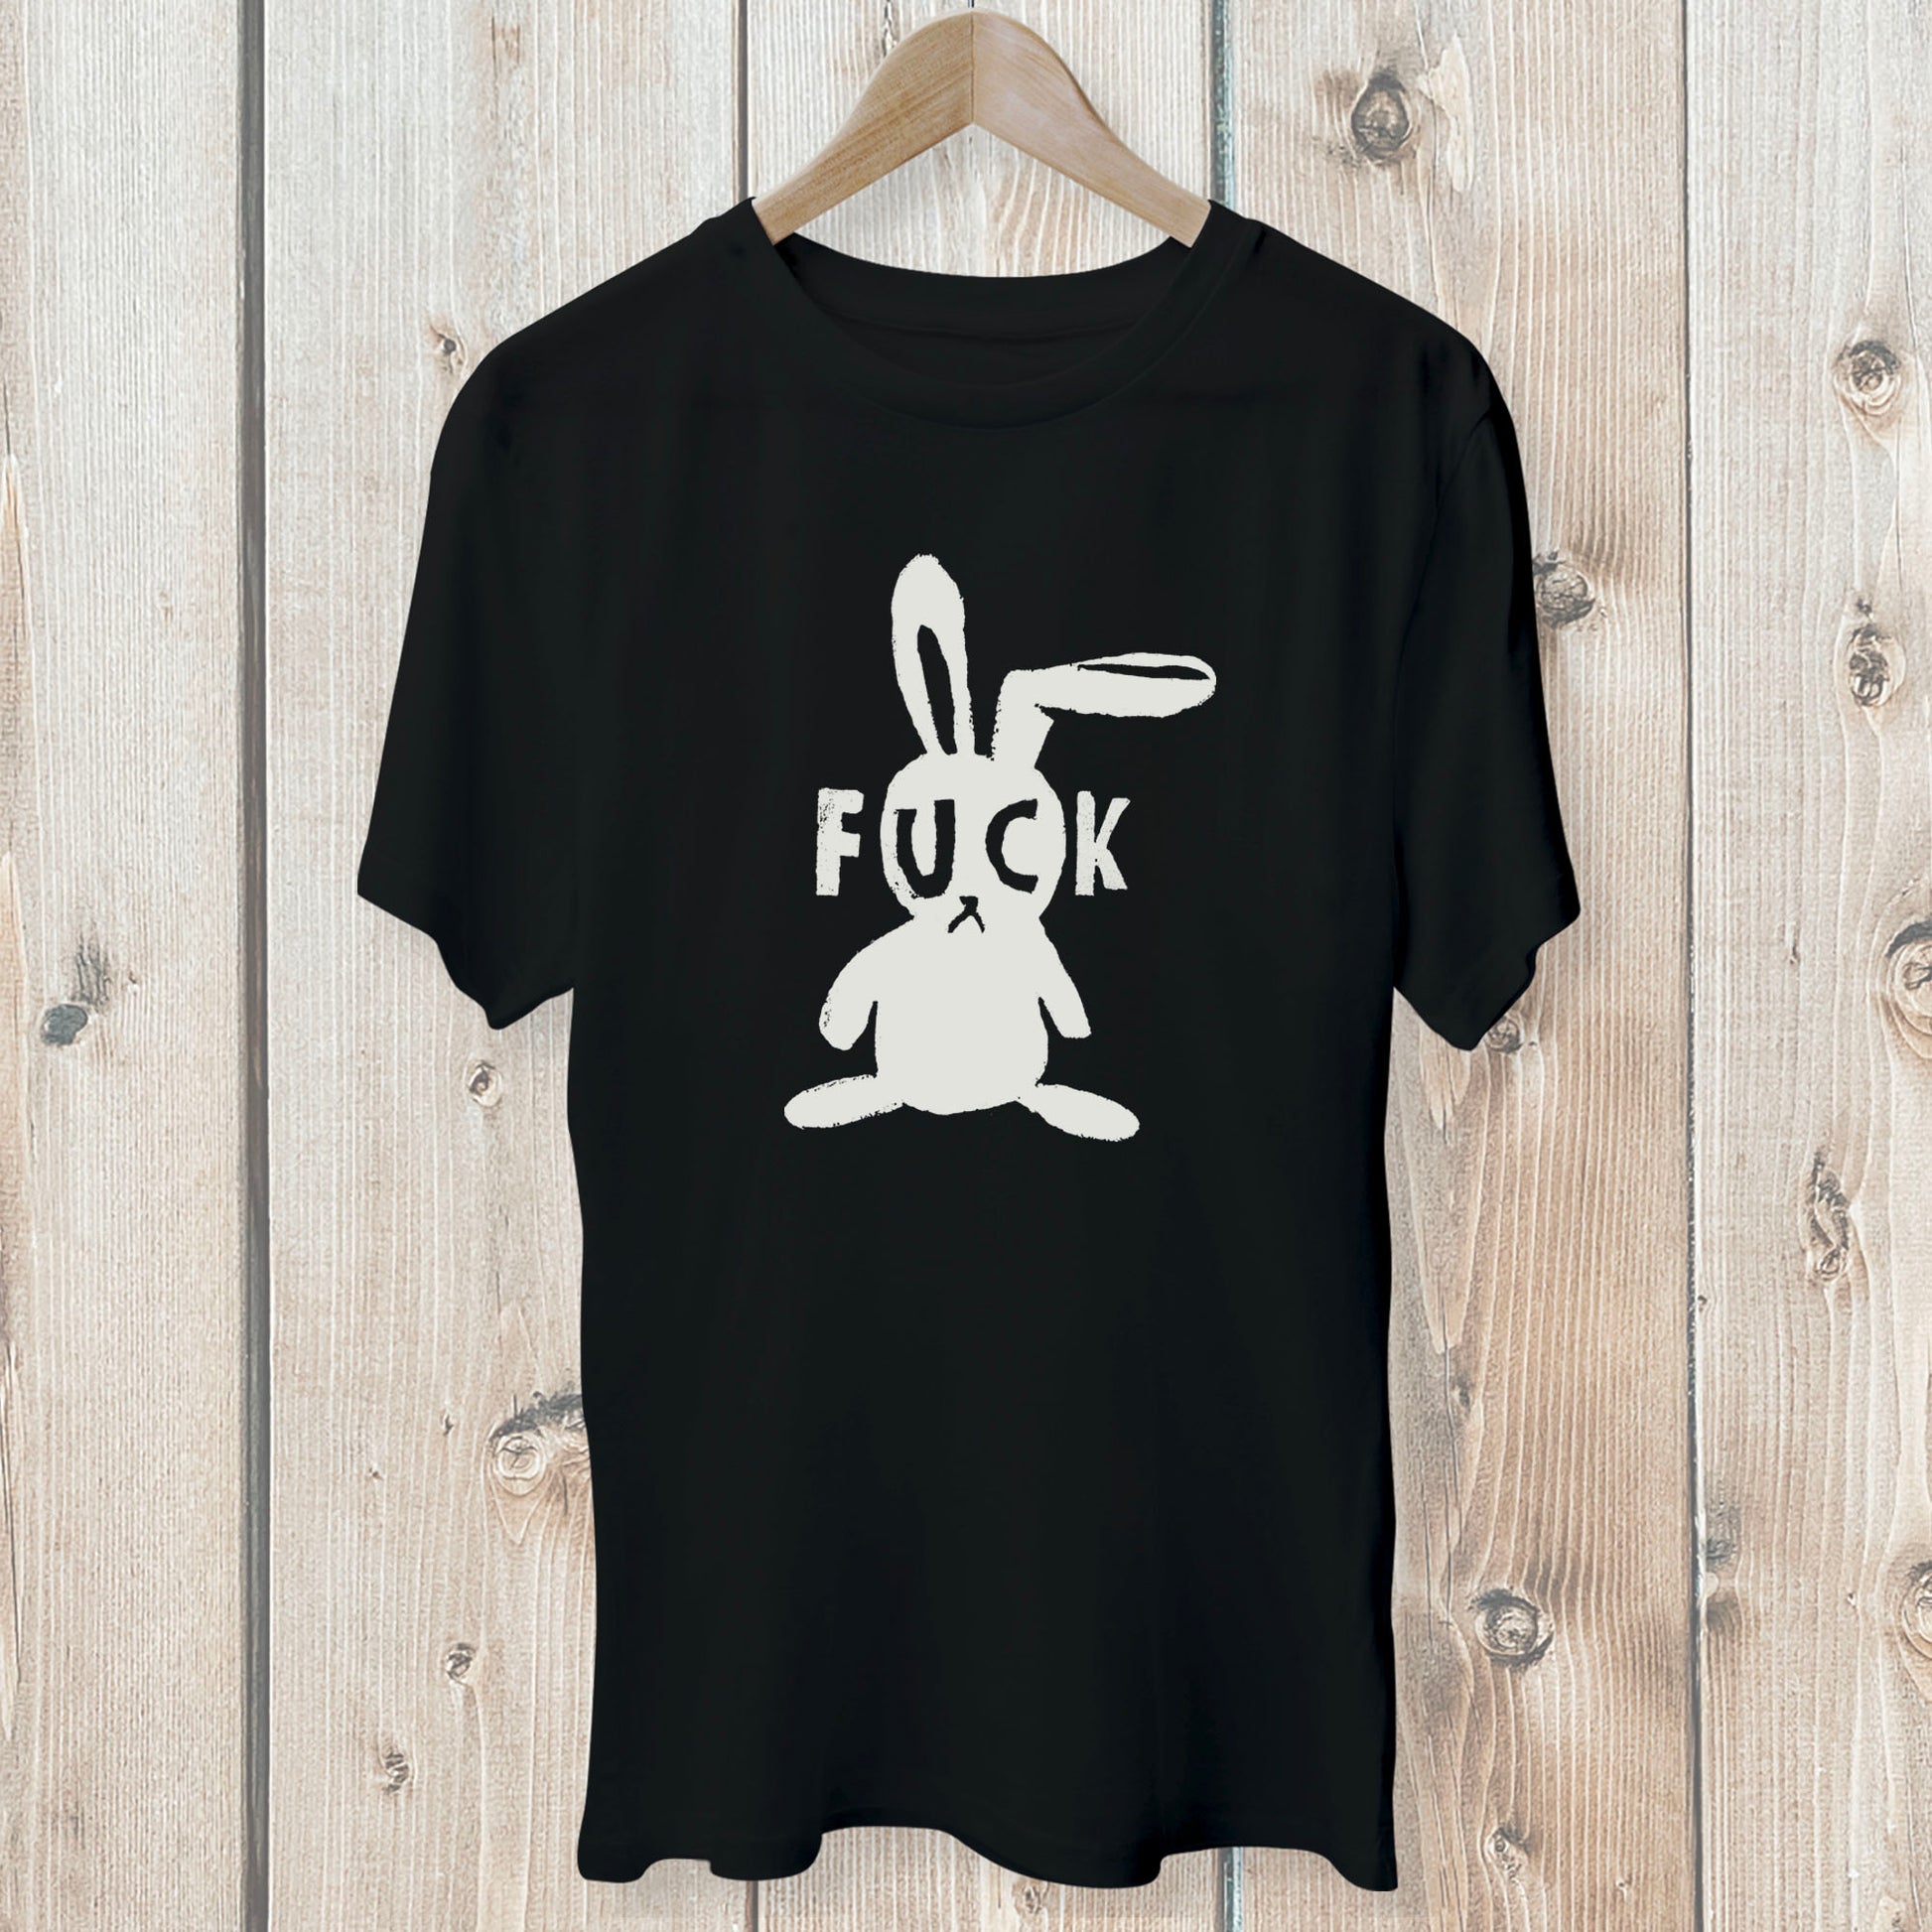 Handmade and Unique clothing... either one-of-a-kind or very limited. Styles range from upcycled garments that we re-imagine into something one of a kind, to our own original styles that we design and construct ourselves, right in Brooklyn, NY. the fuck bunny tee is original art and handpainted design tee.